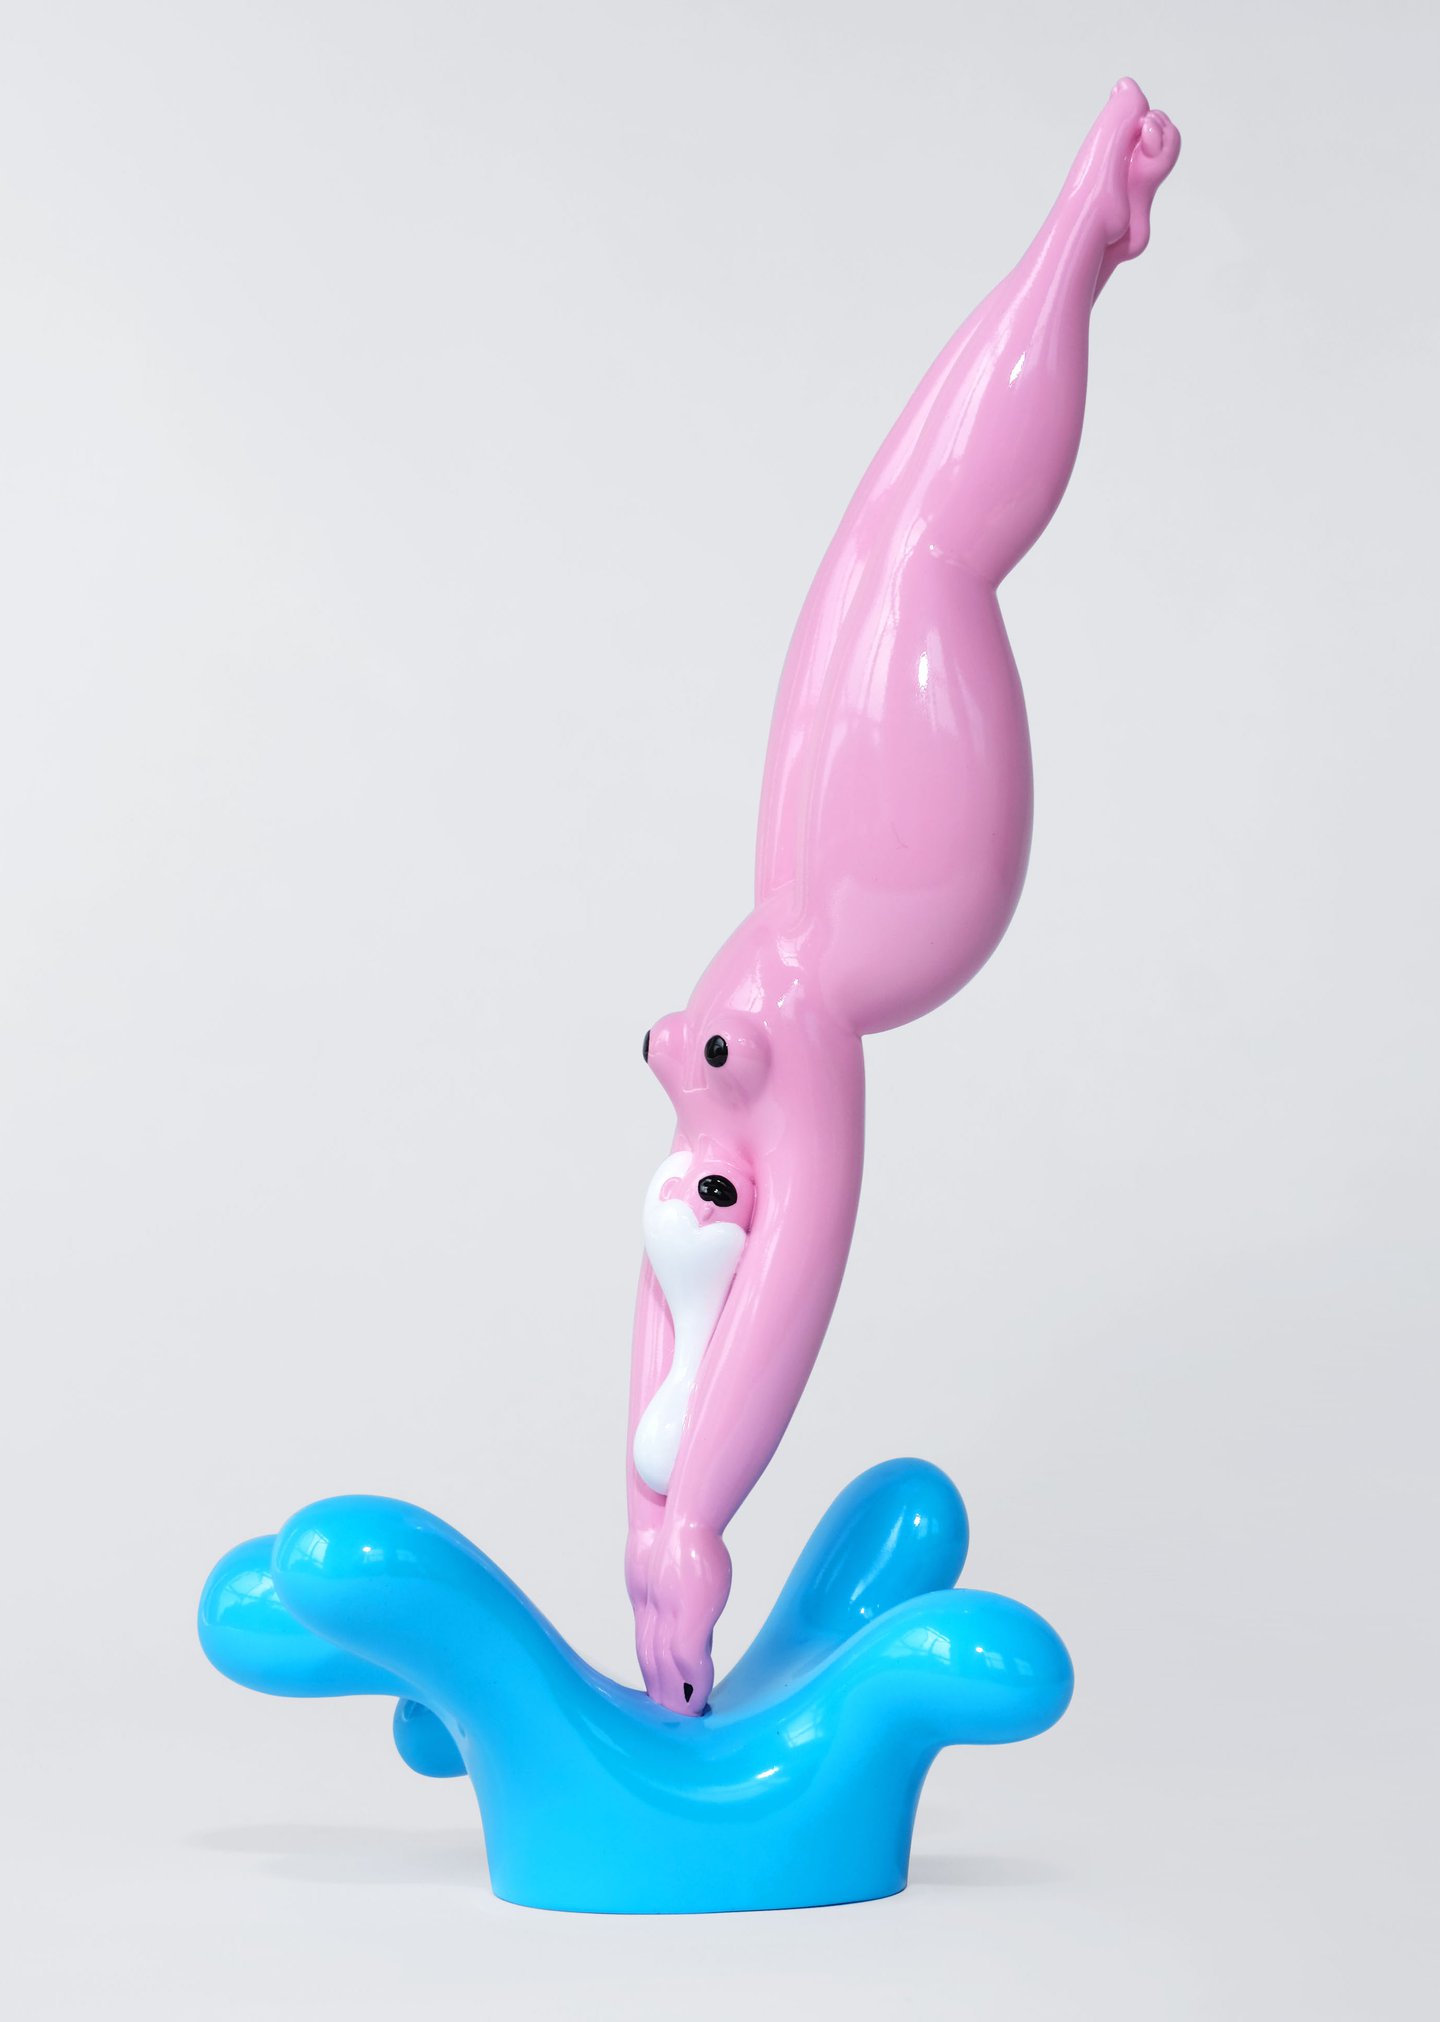 Marylou Faure makes a hearty splash with a daring dive into 3D inflatable sculpture